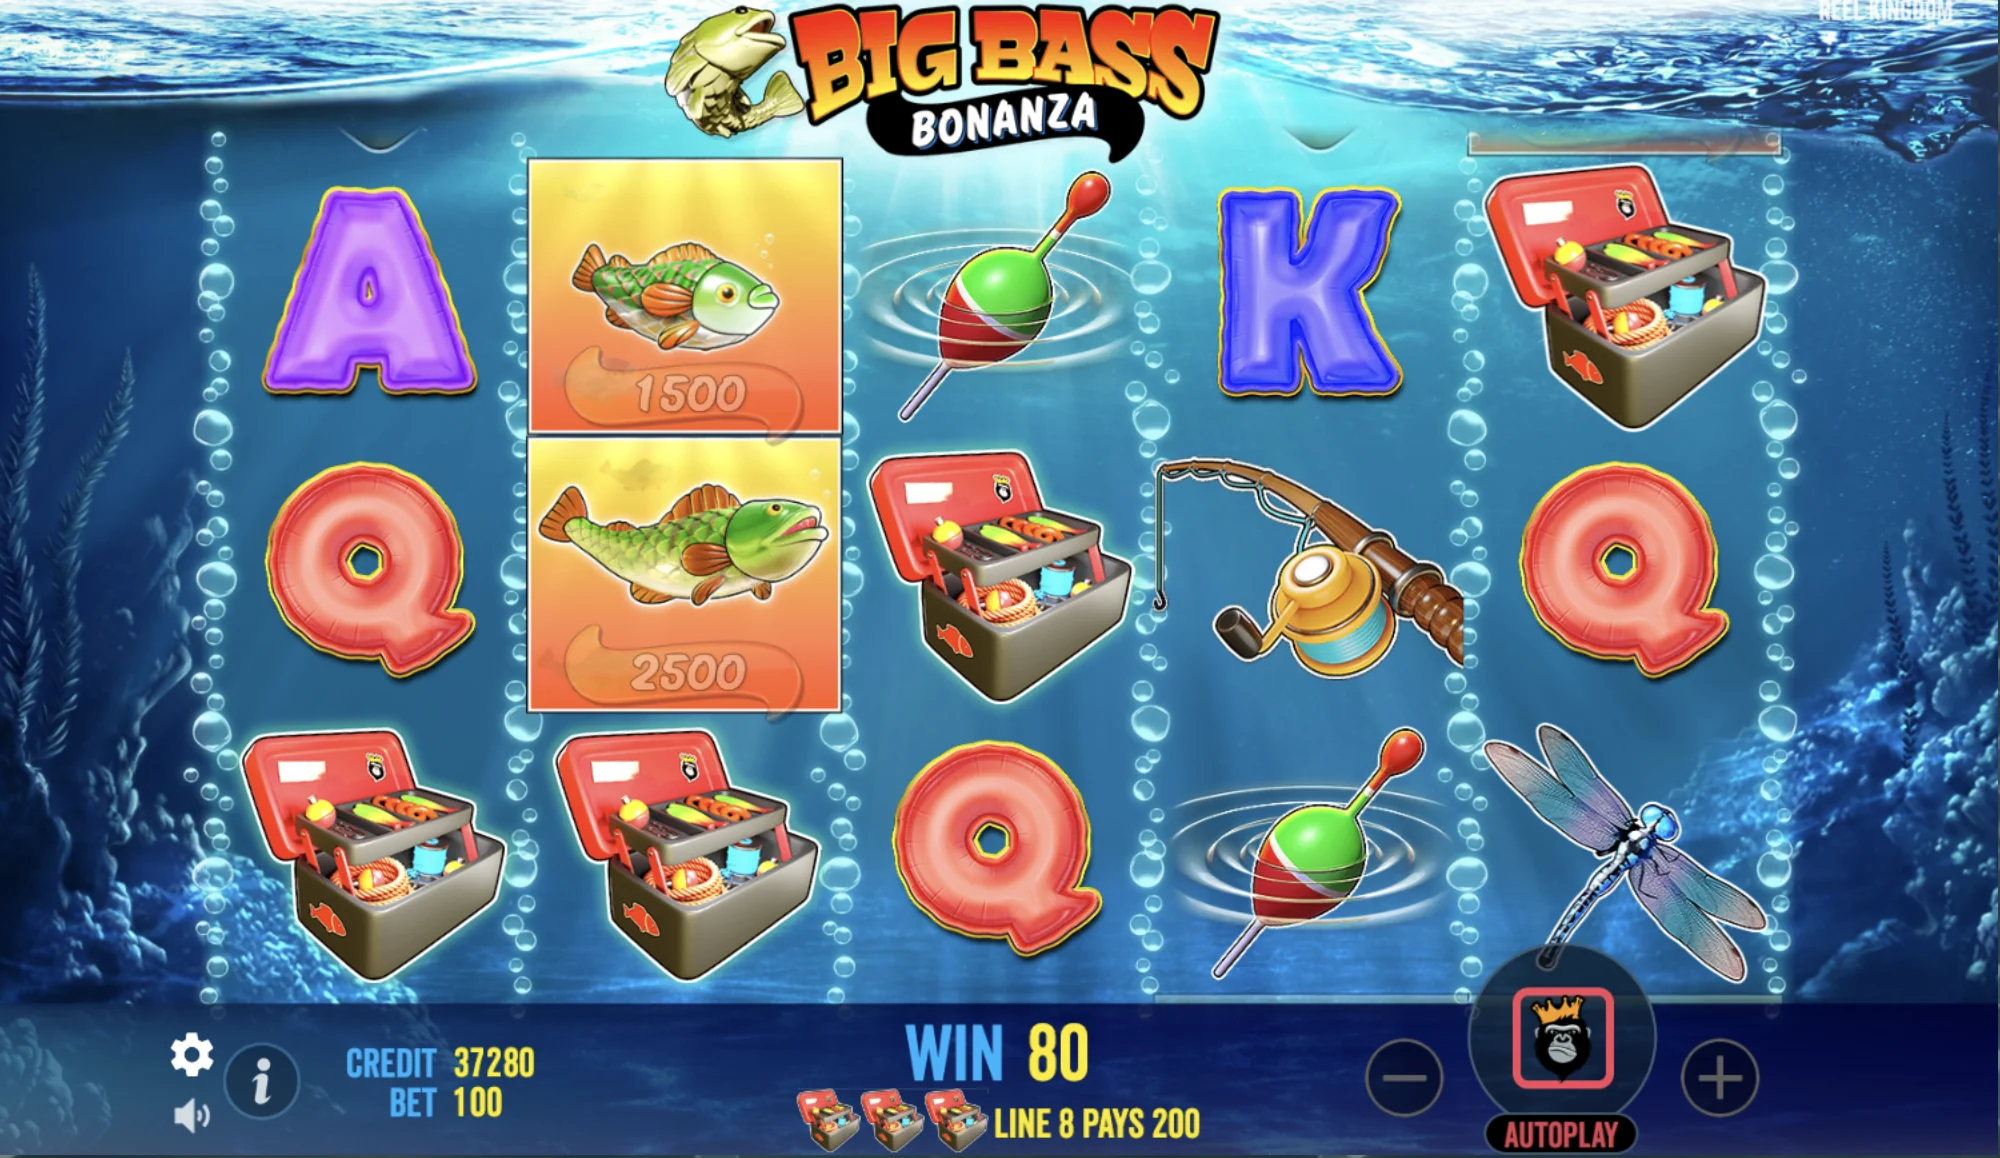 What are the main differences between the versions of big bass bonanza slot game?